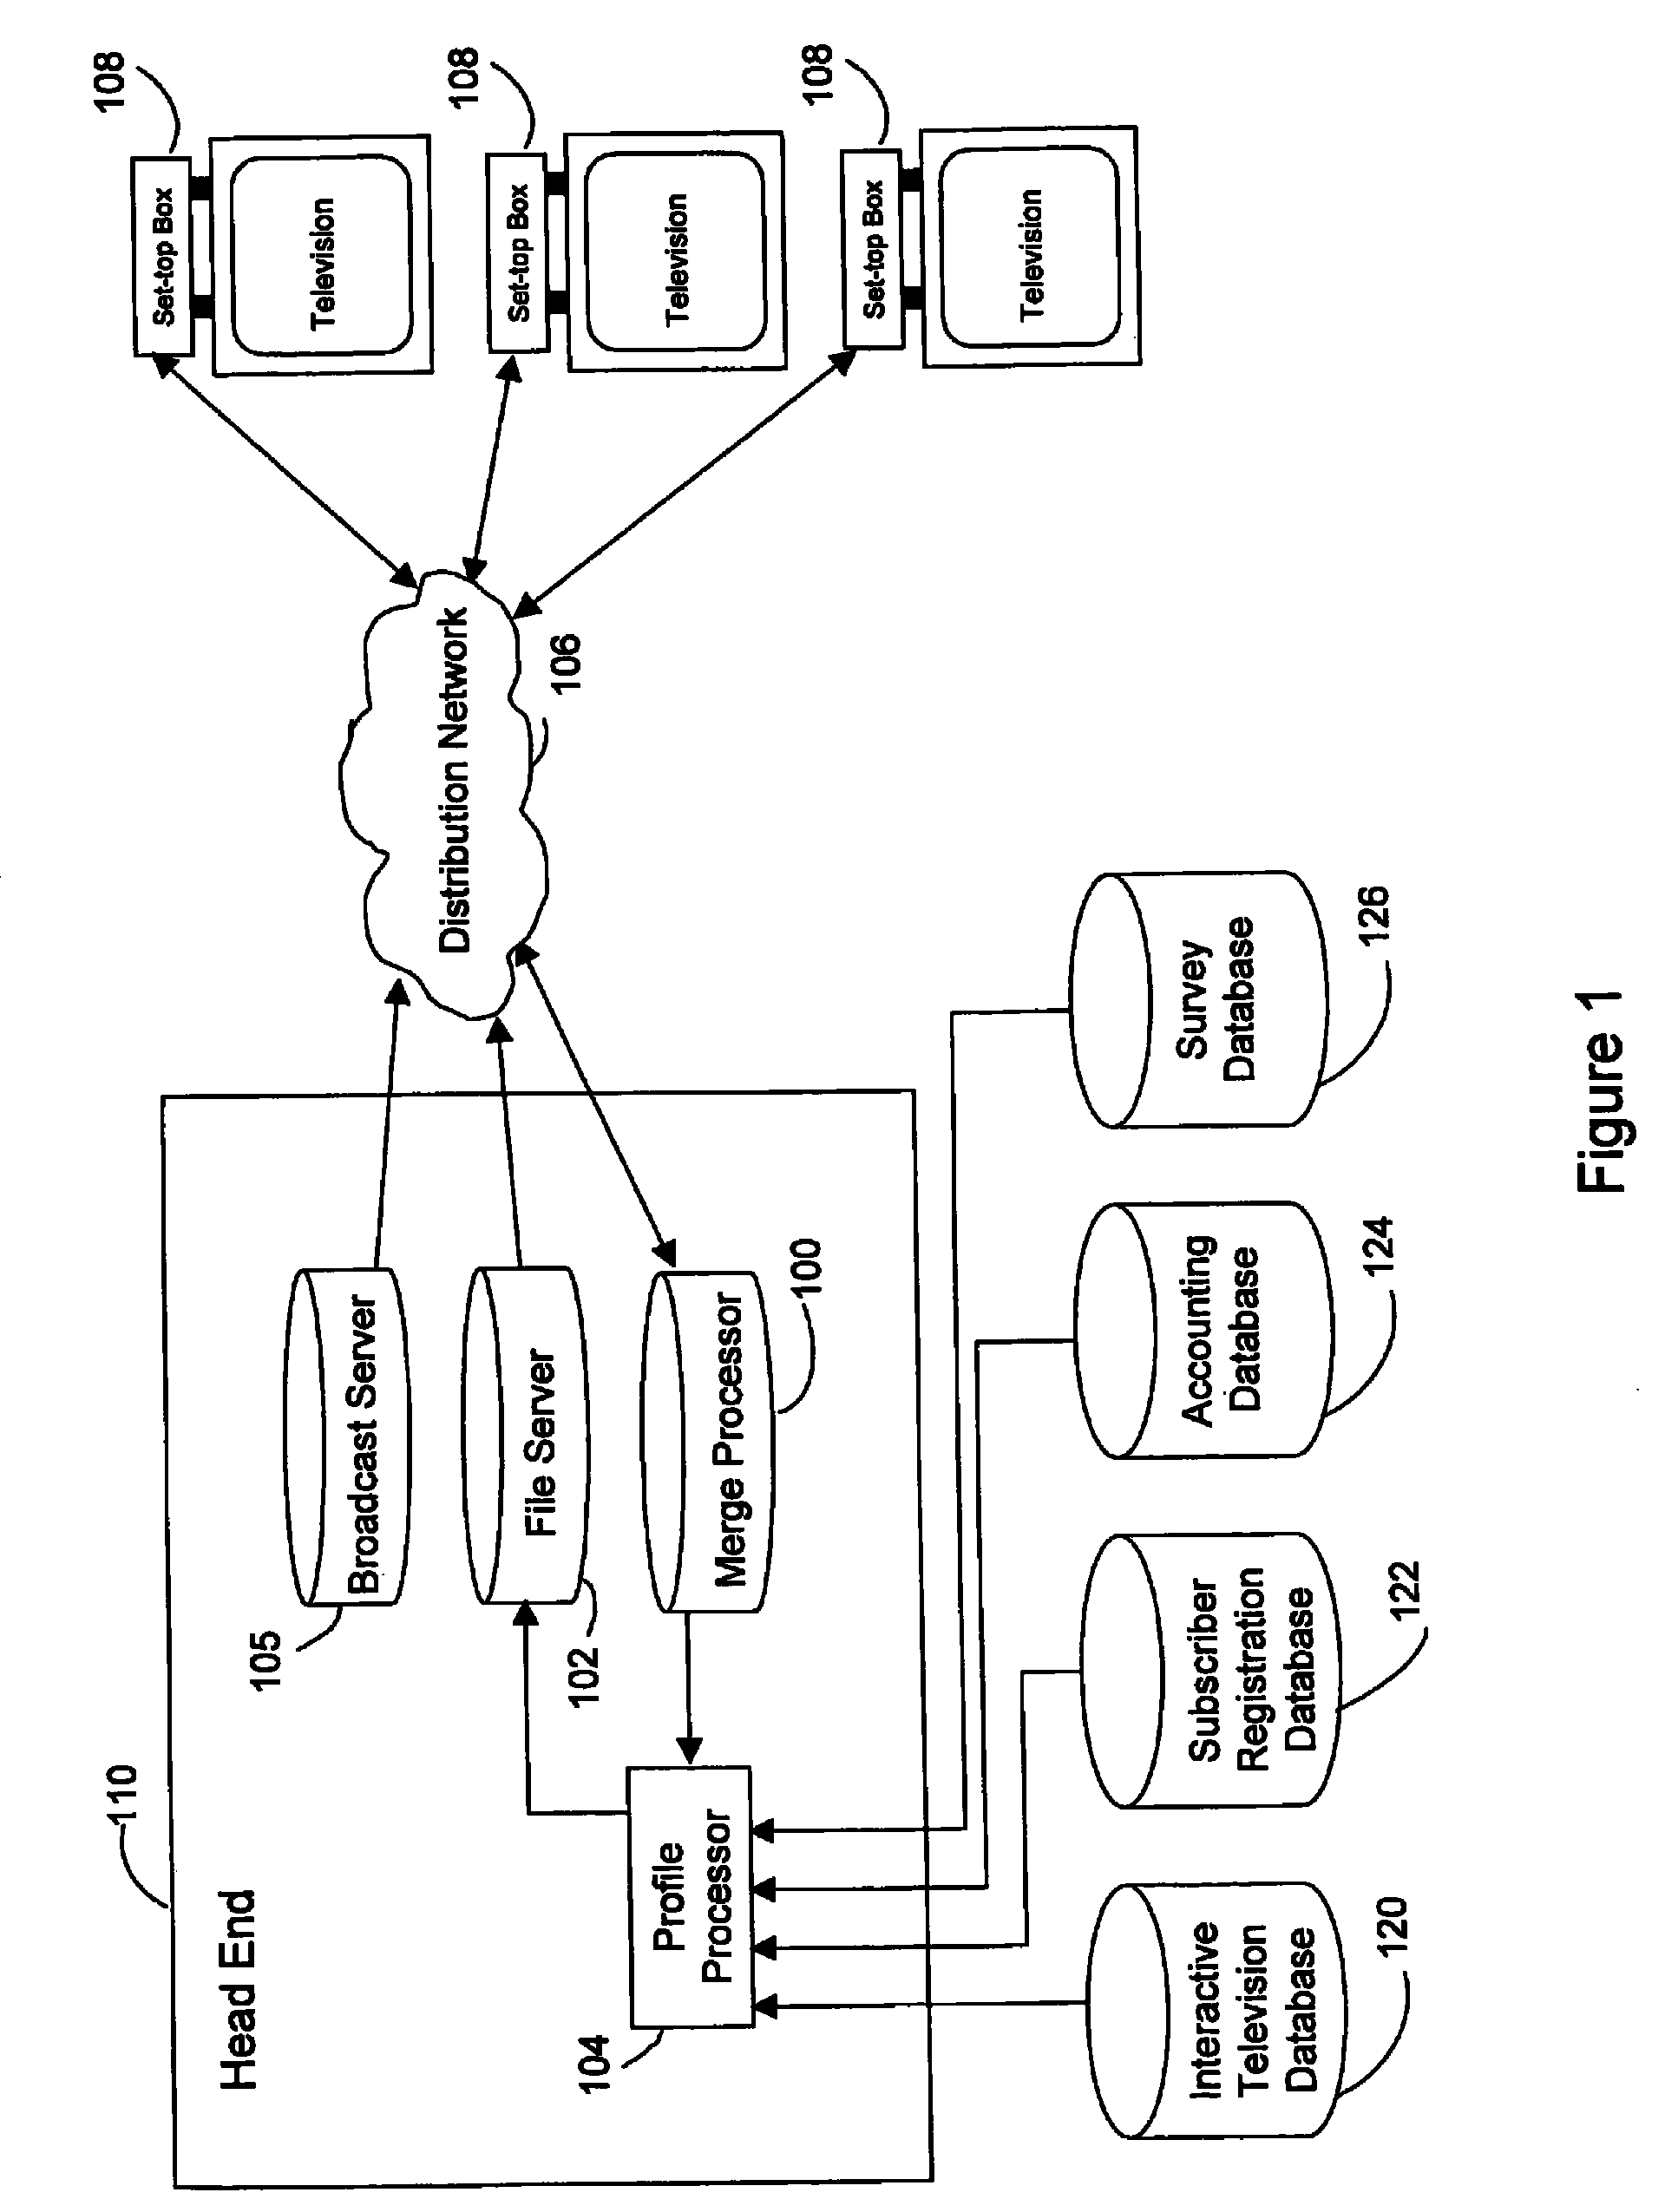 Methods and systems for providing targeted content